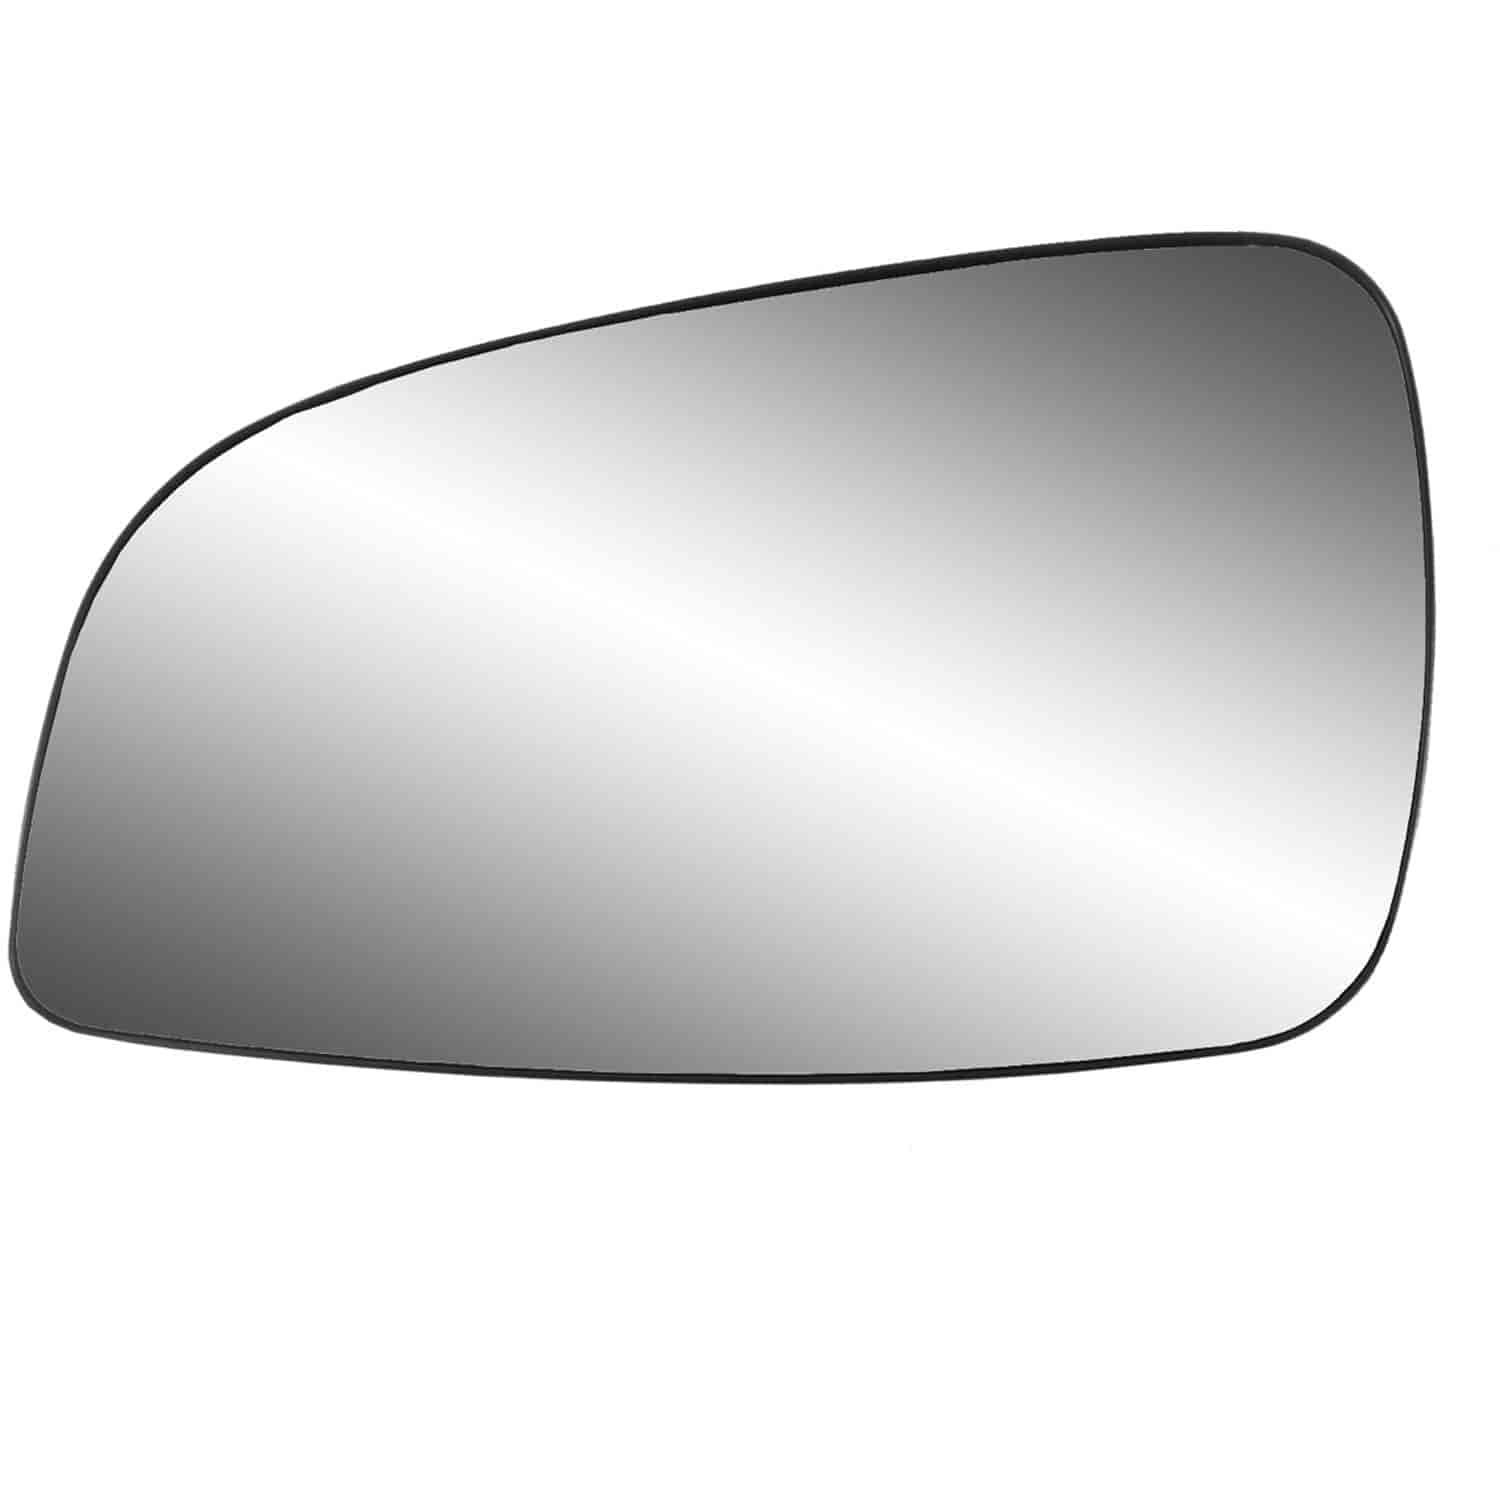 Replacement Glass Assembly for 08-12 Malibu LS/ LT Model except classic style 08; 08-10 Malibu Hybri